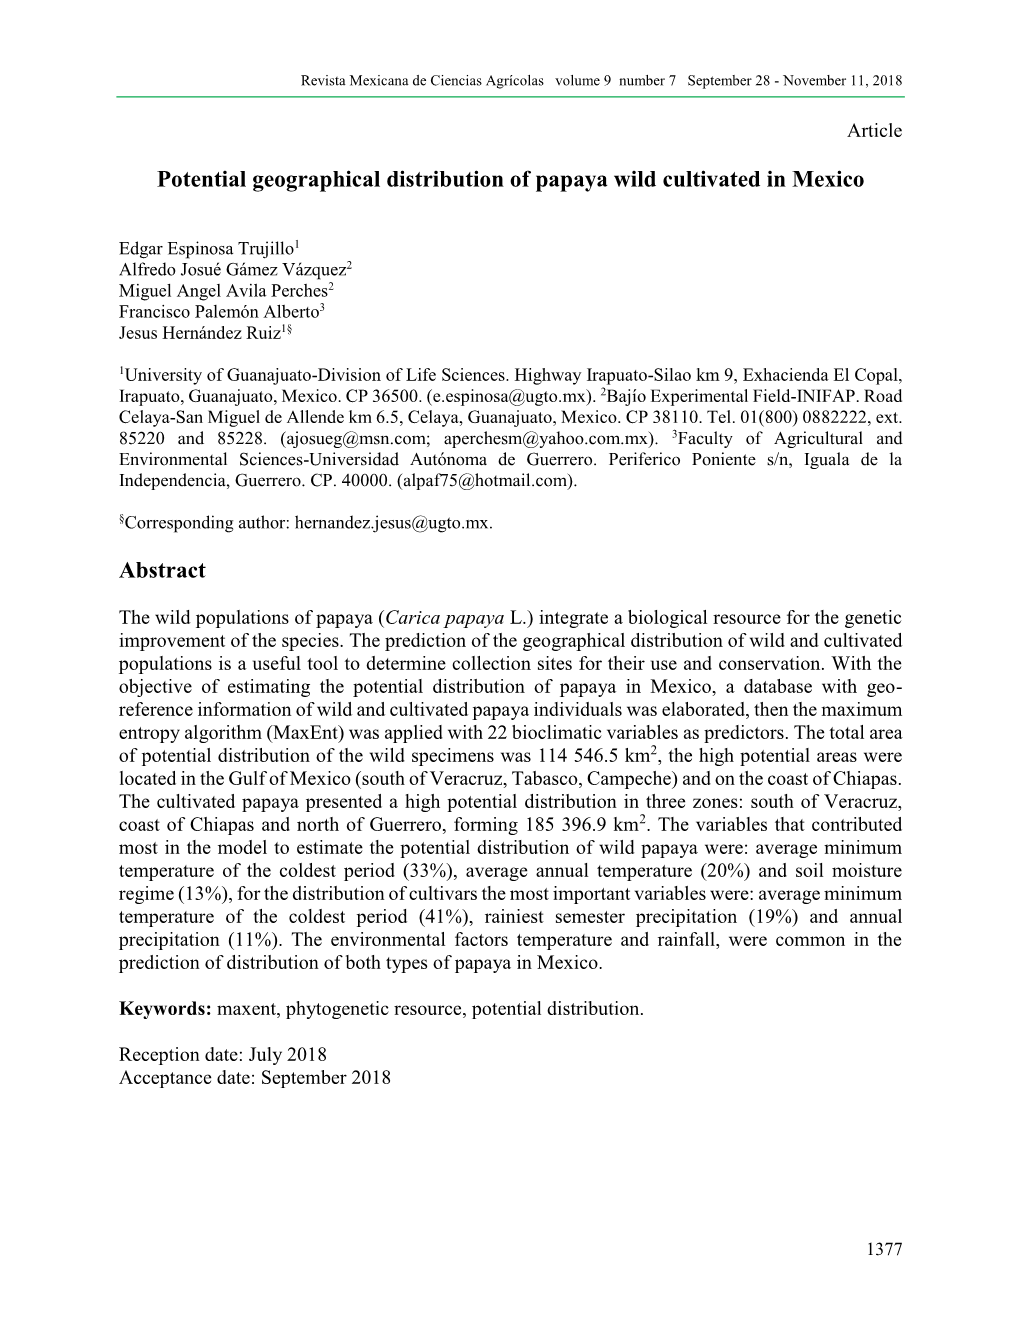 Potential Geographical Distribution of Papaya Wild Cultivated in Mexico Abstract